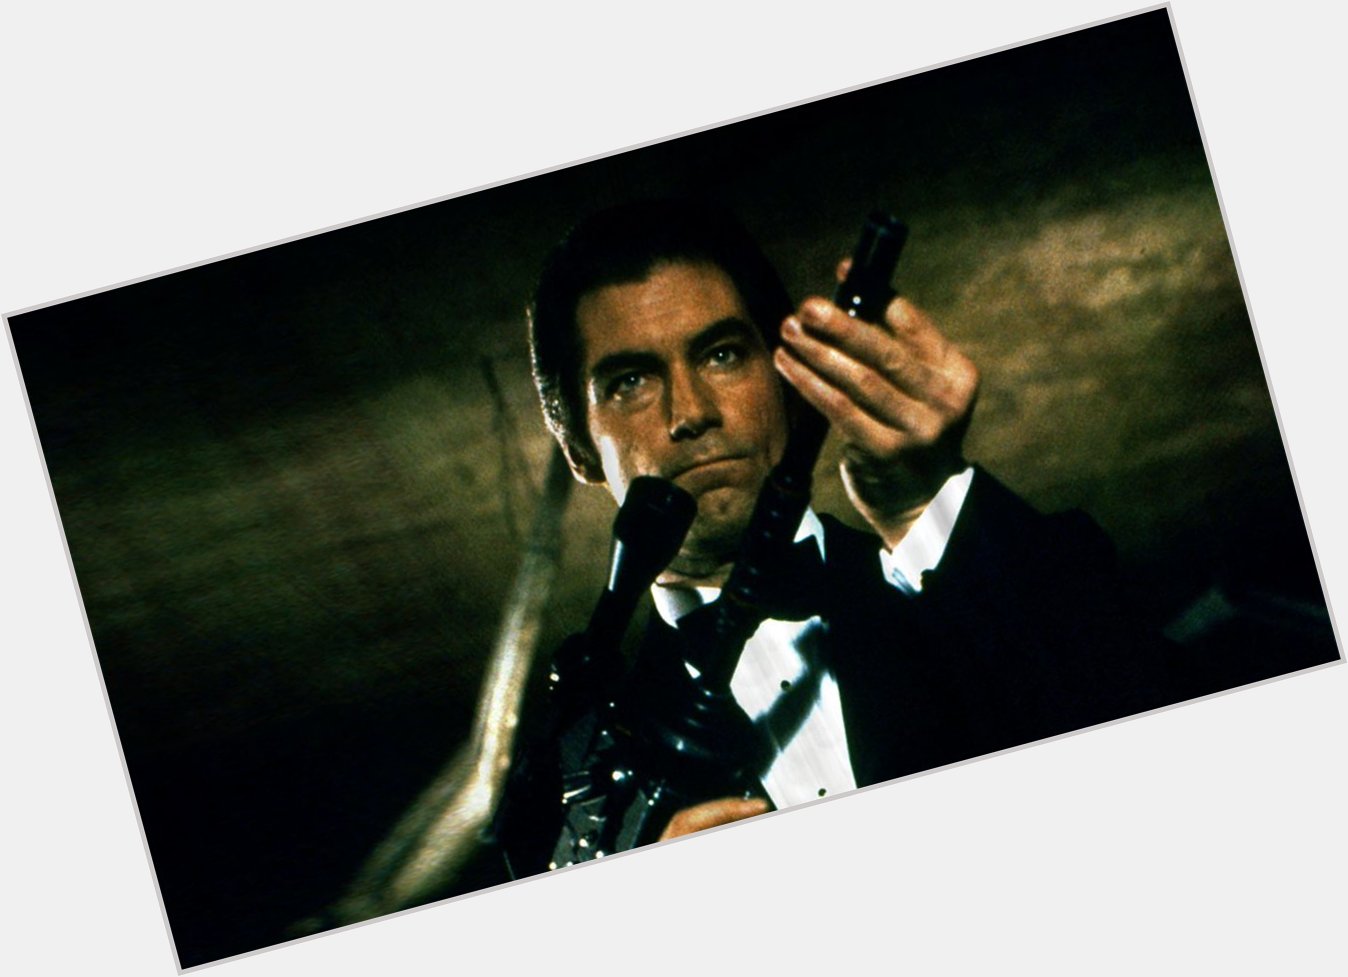 A very happy birthday to Timothy Dalton. He played 007 in THE LIVING DAYLIGHTS (1987) and LICENCE TO KILL (1989). 